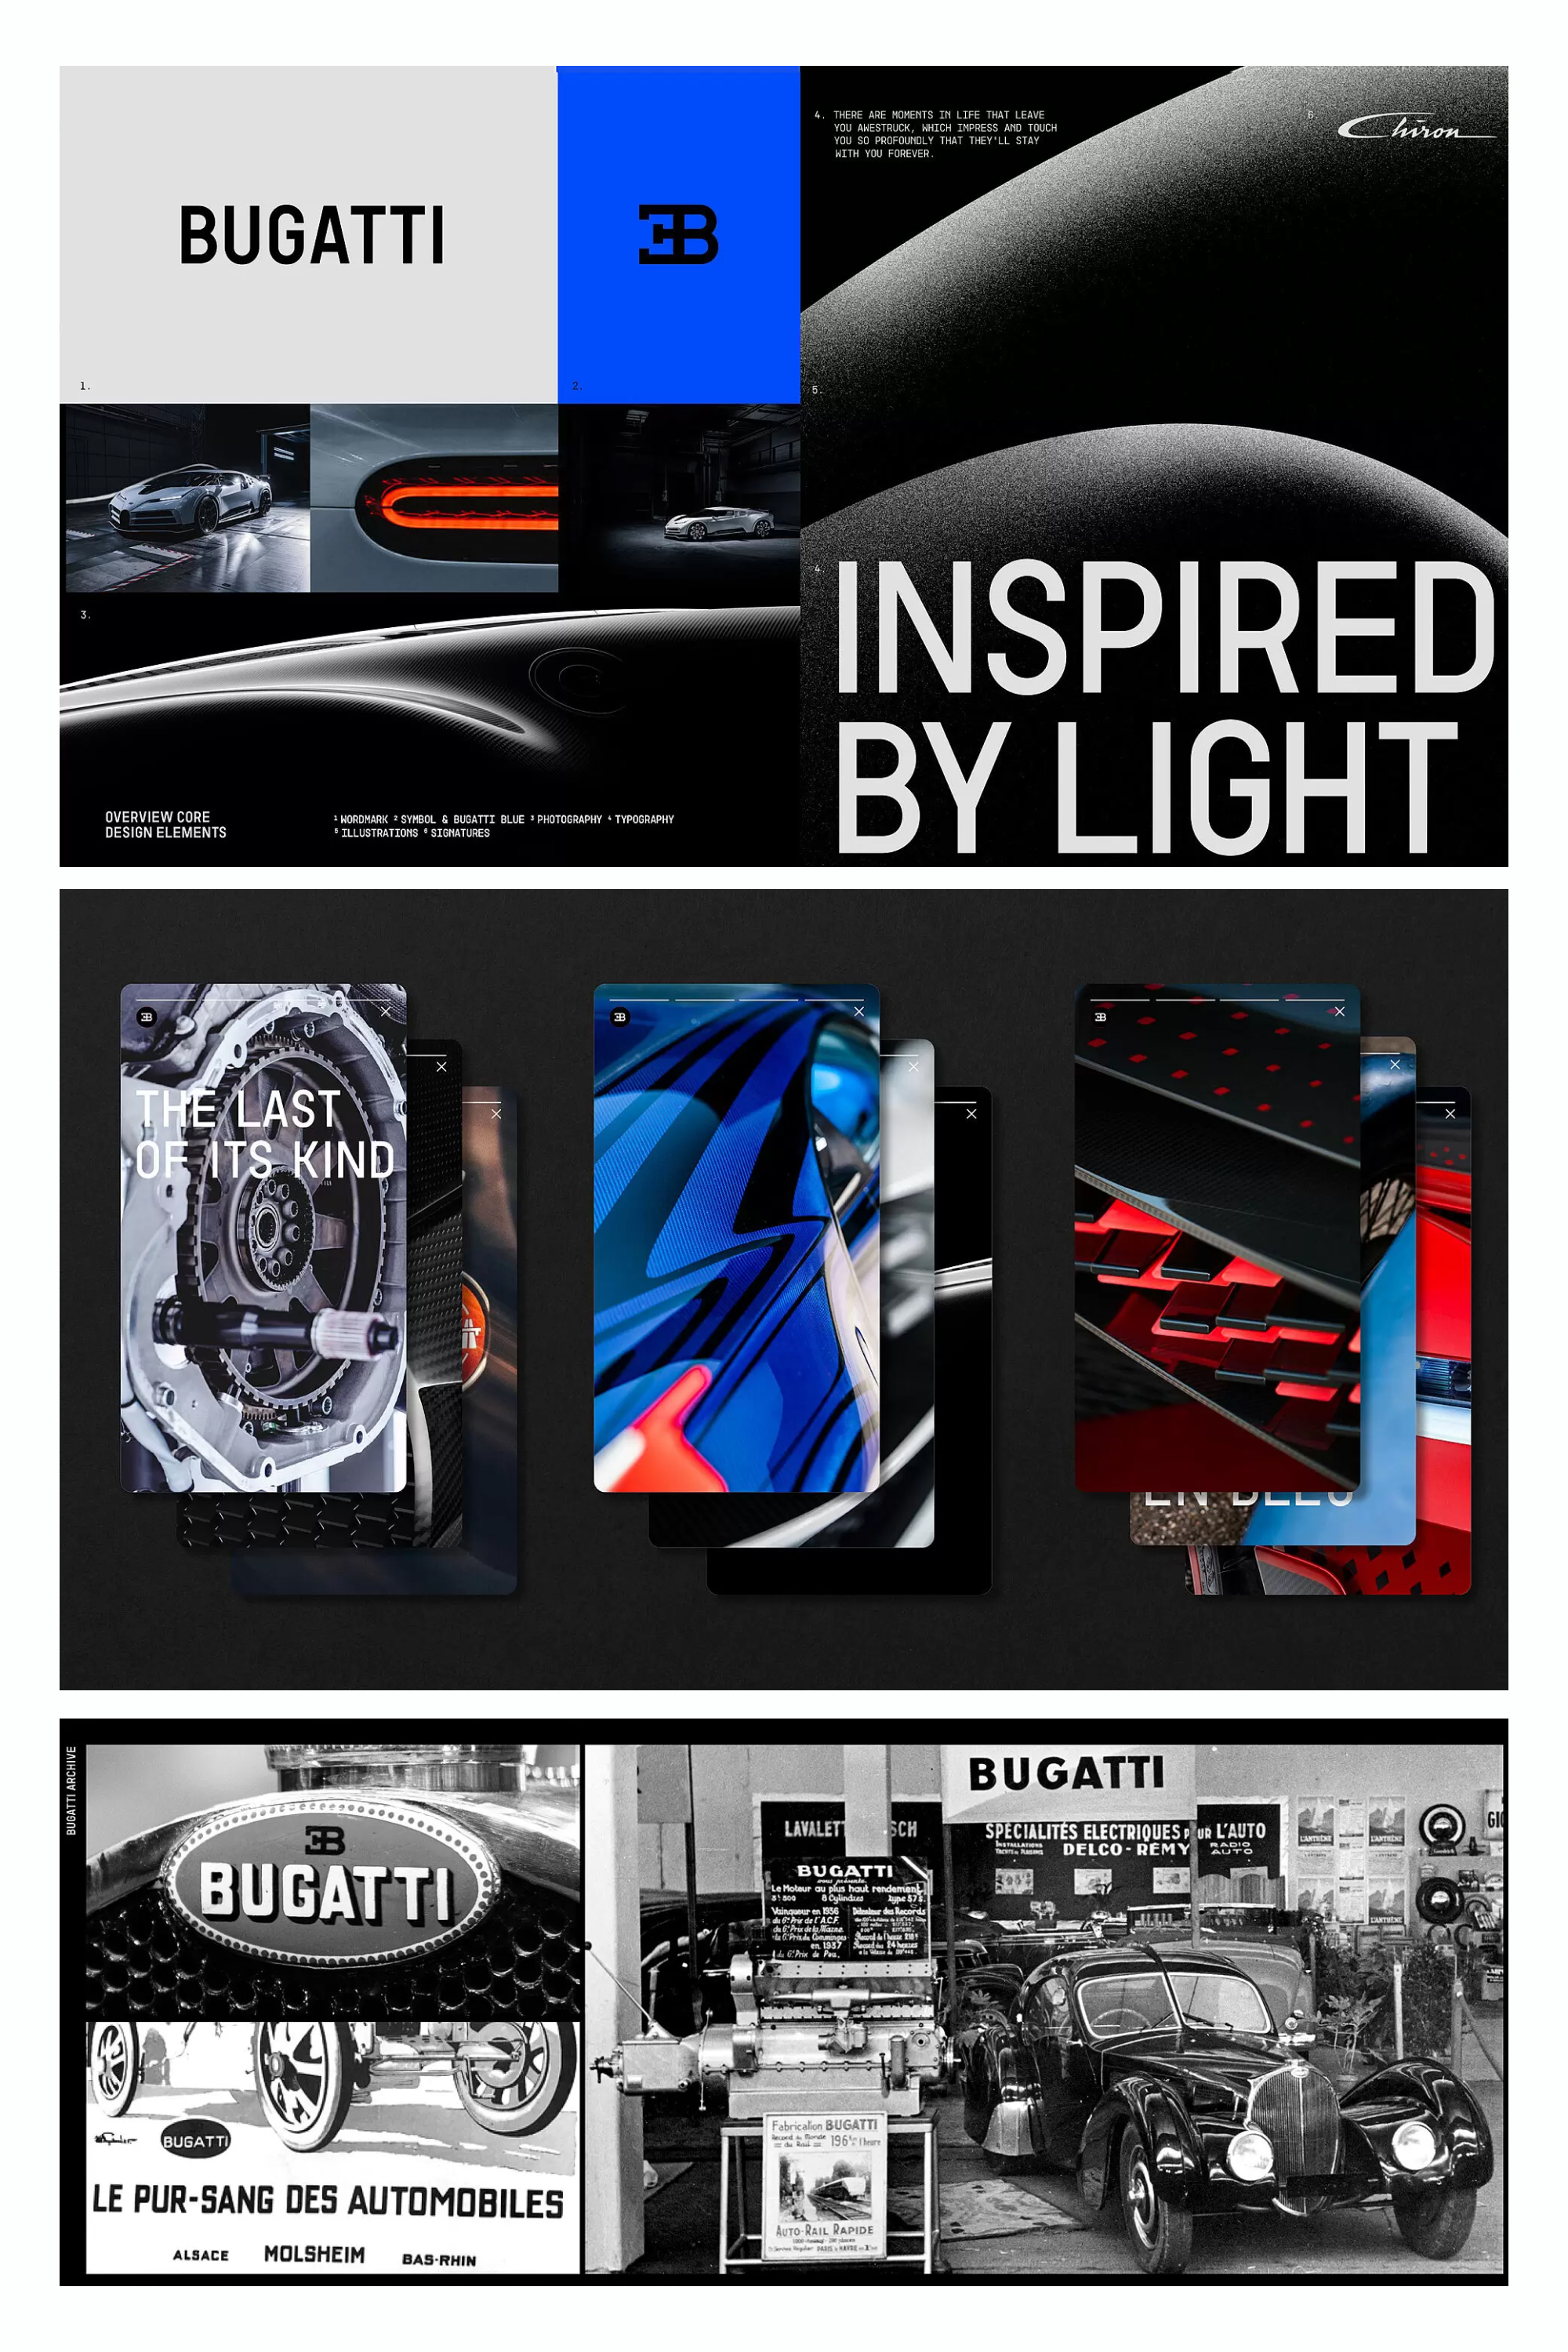 Image collage with photos of Bugatti cars.